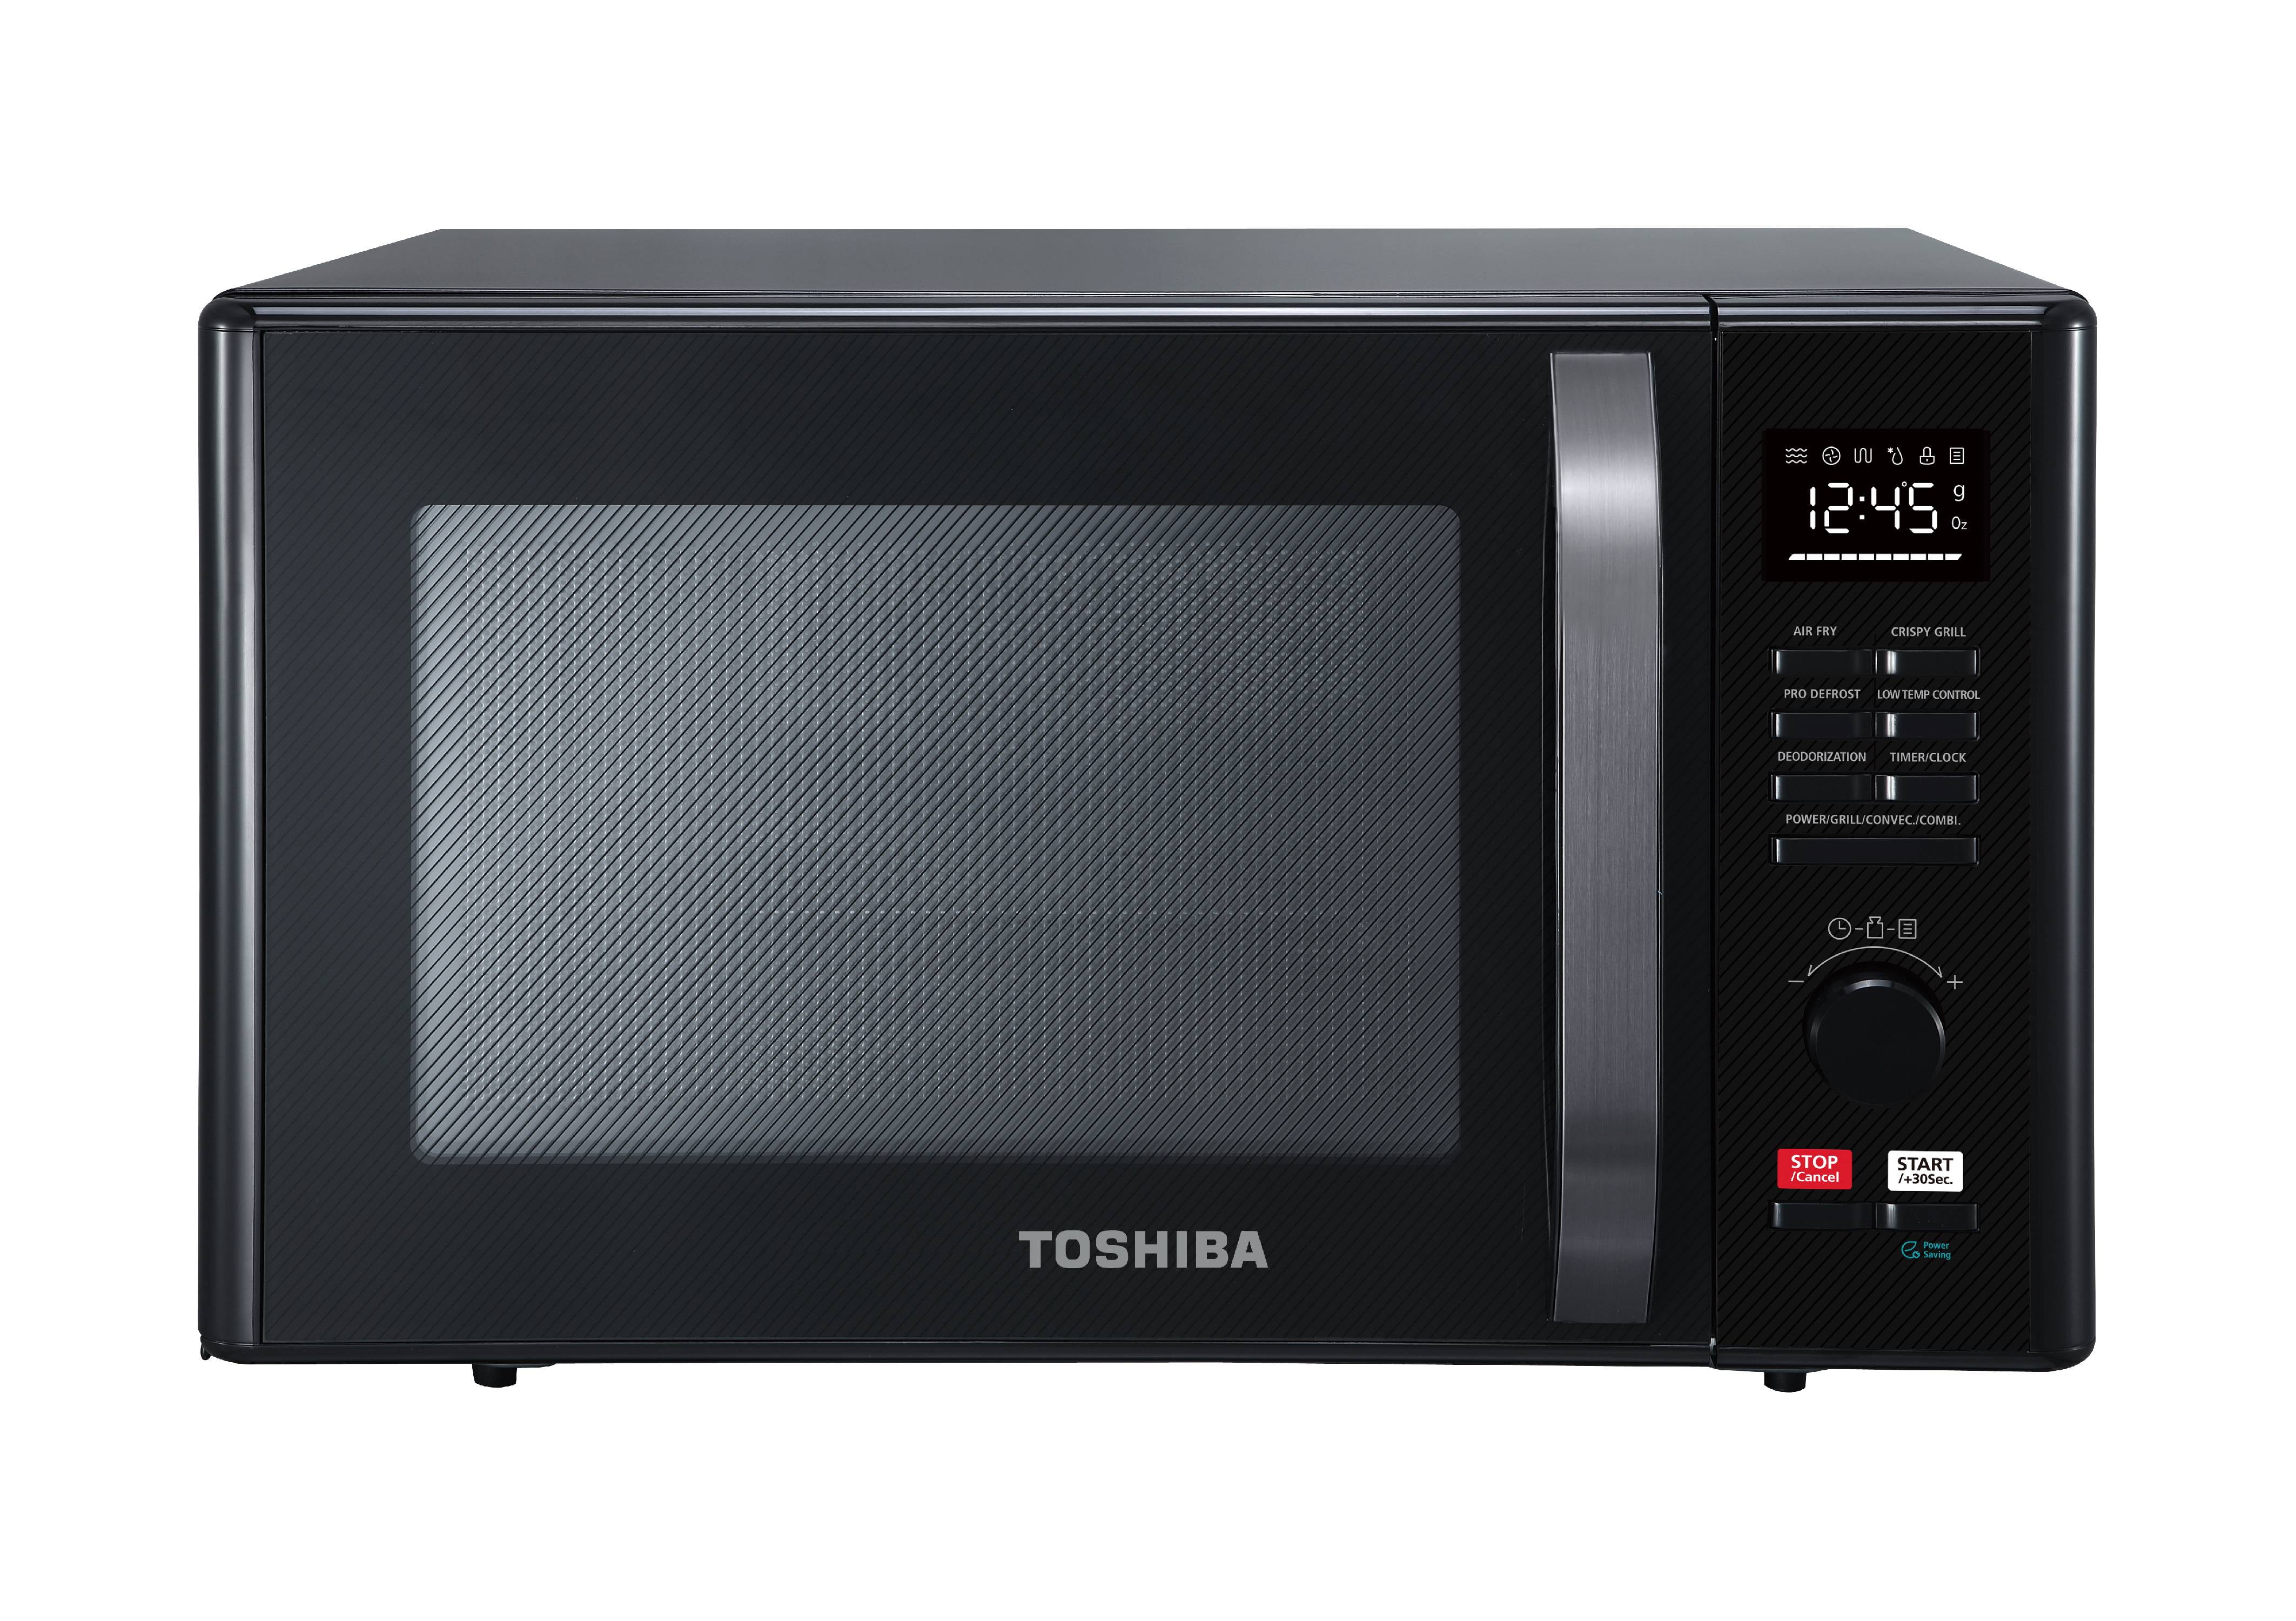 TOSHIBA Air Fry Combo 5-IN-1 26L Countertop Microwave Oven, Broil, Bake